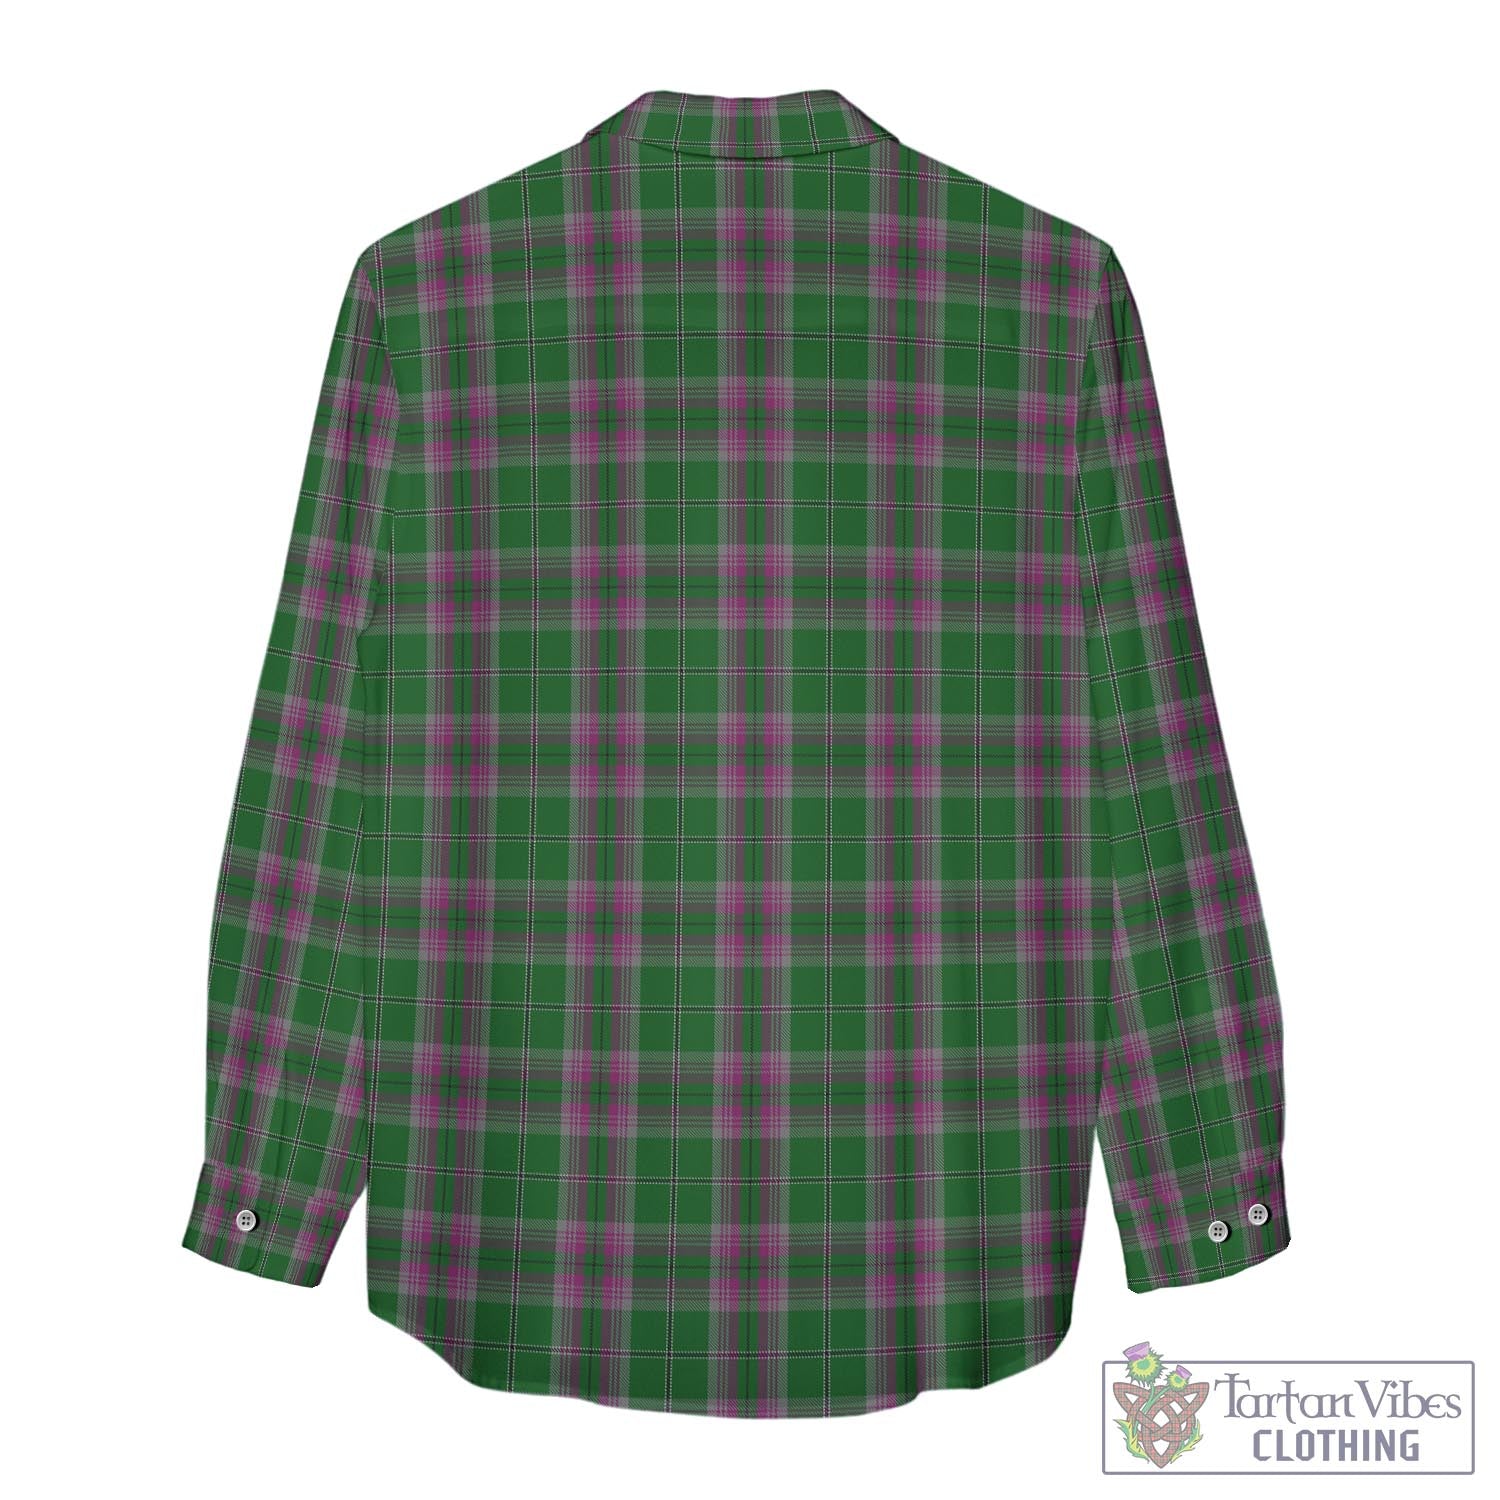 Tartan Vibes Clothing Gray Hunting Tartan Womens Casual Shirt with Family Crest